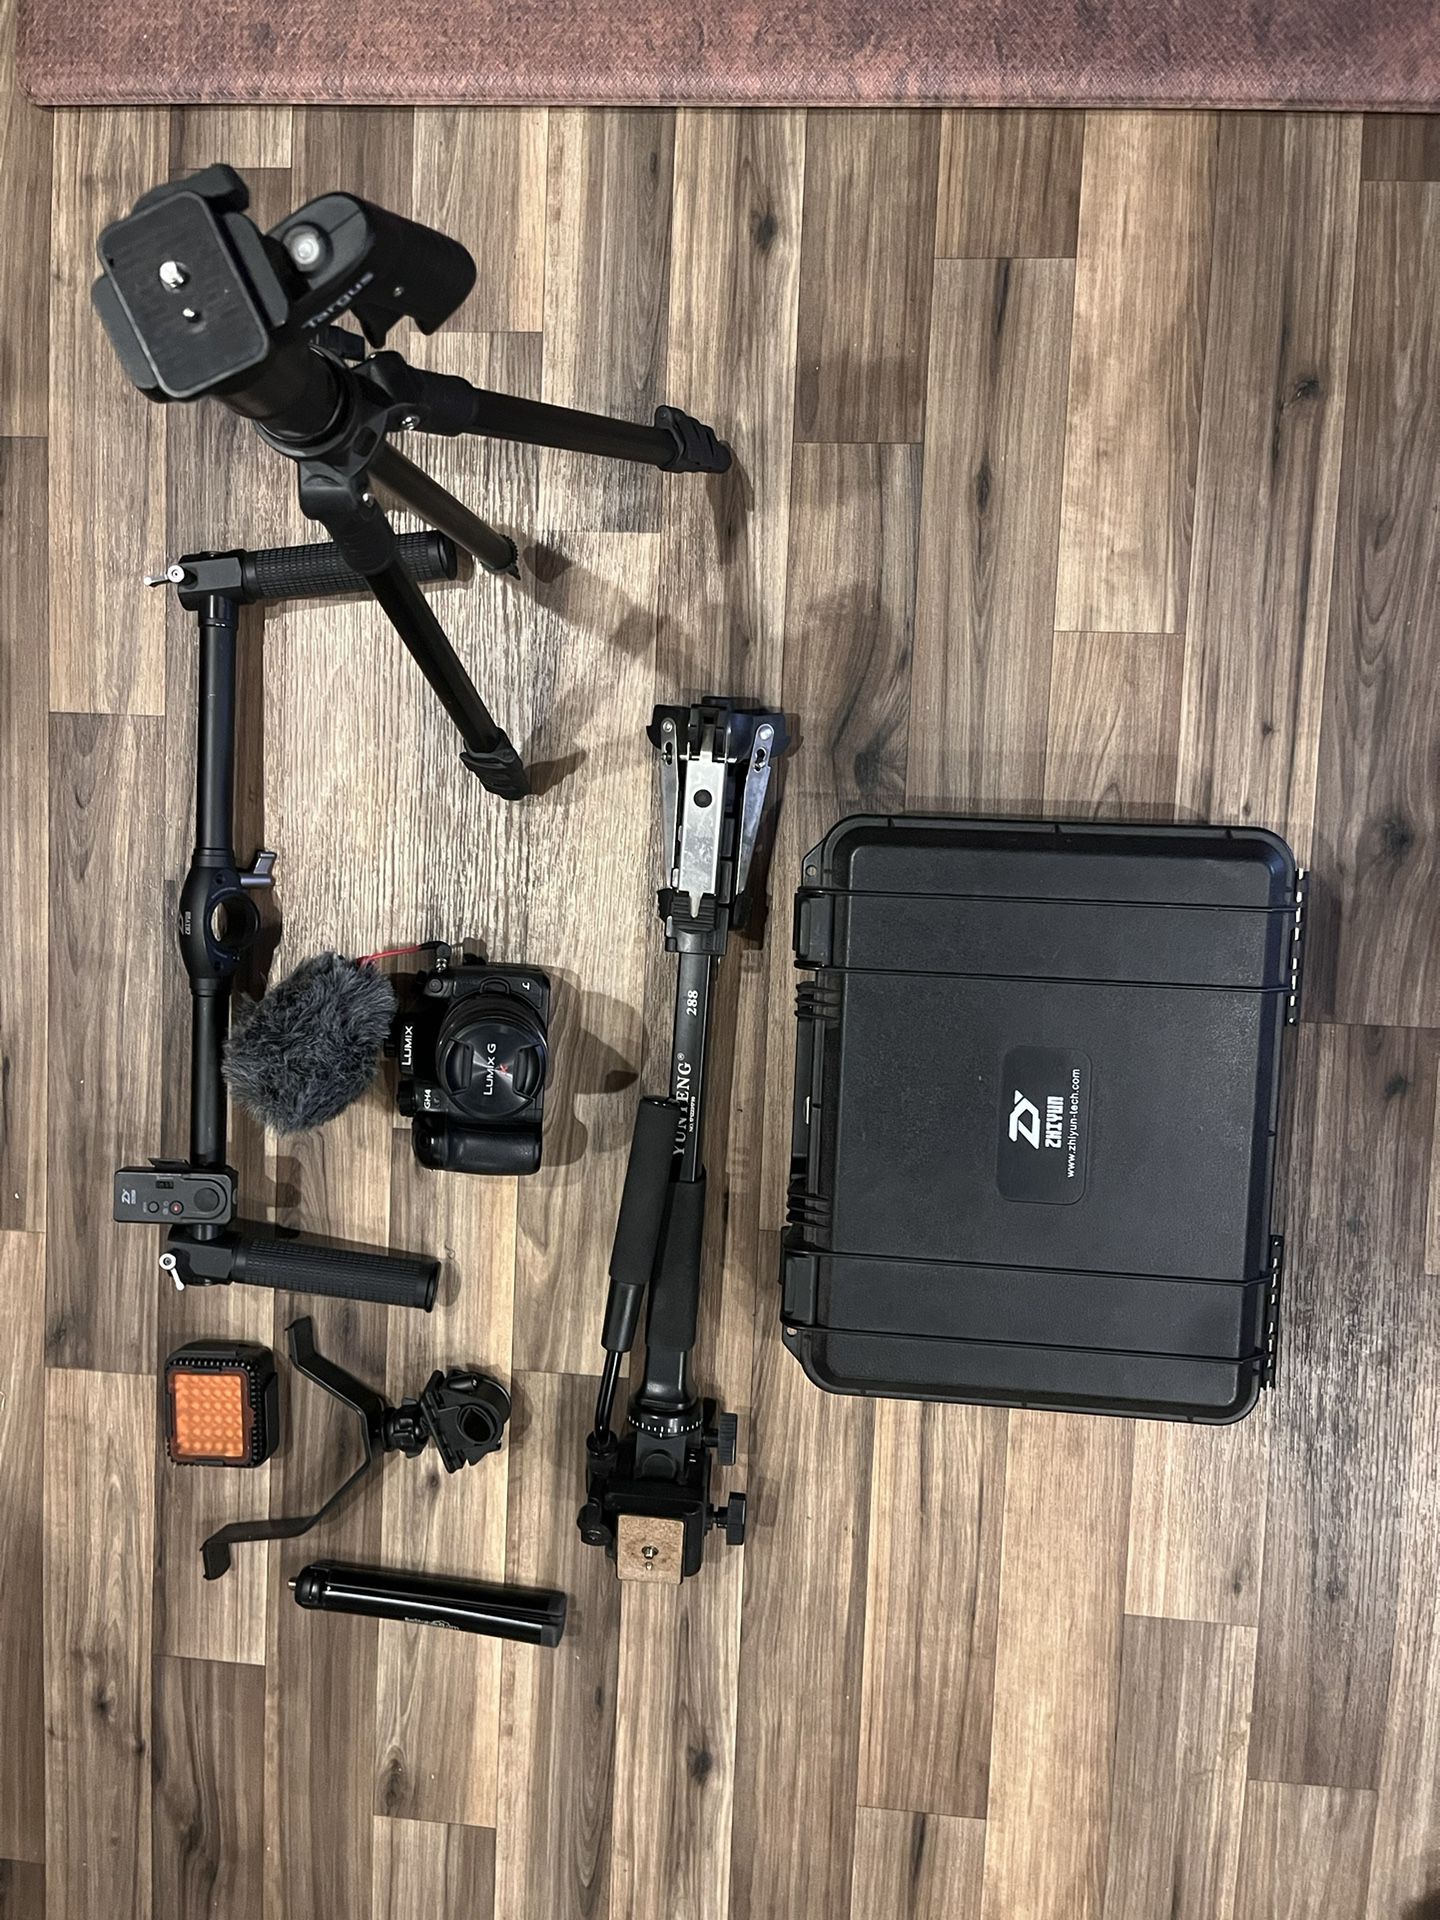 Videography business equipment GH4 Lumix Panasonic, Gimbal And Accessories